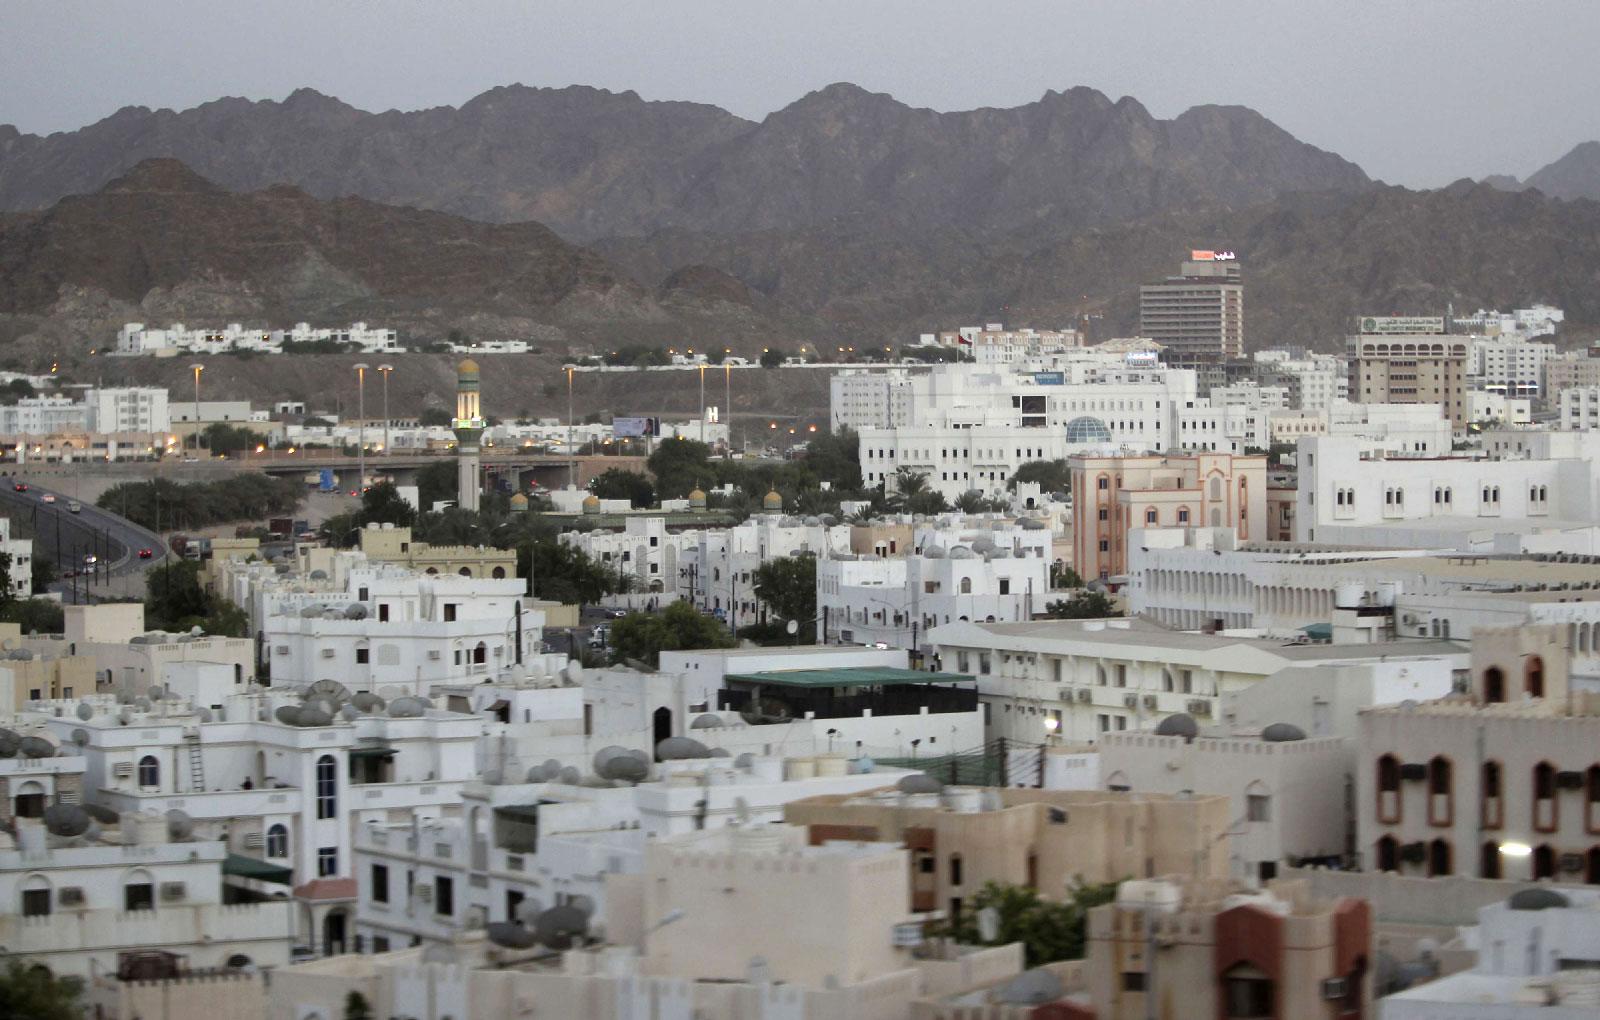 A general view of the city, in Muscat, Oman.